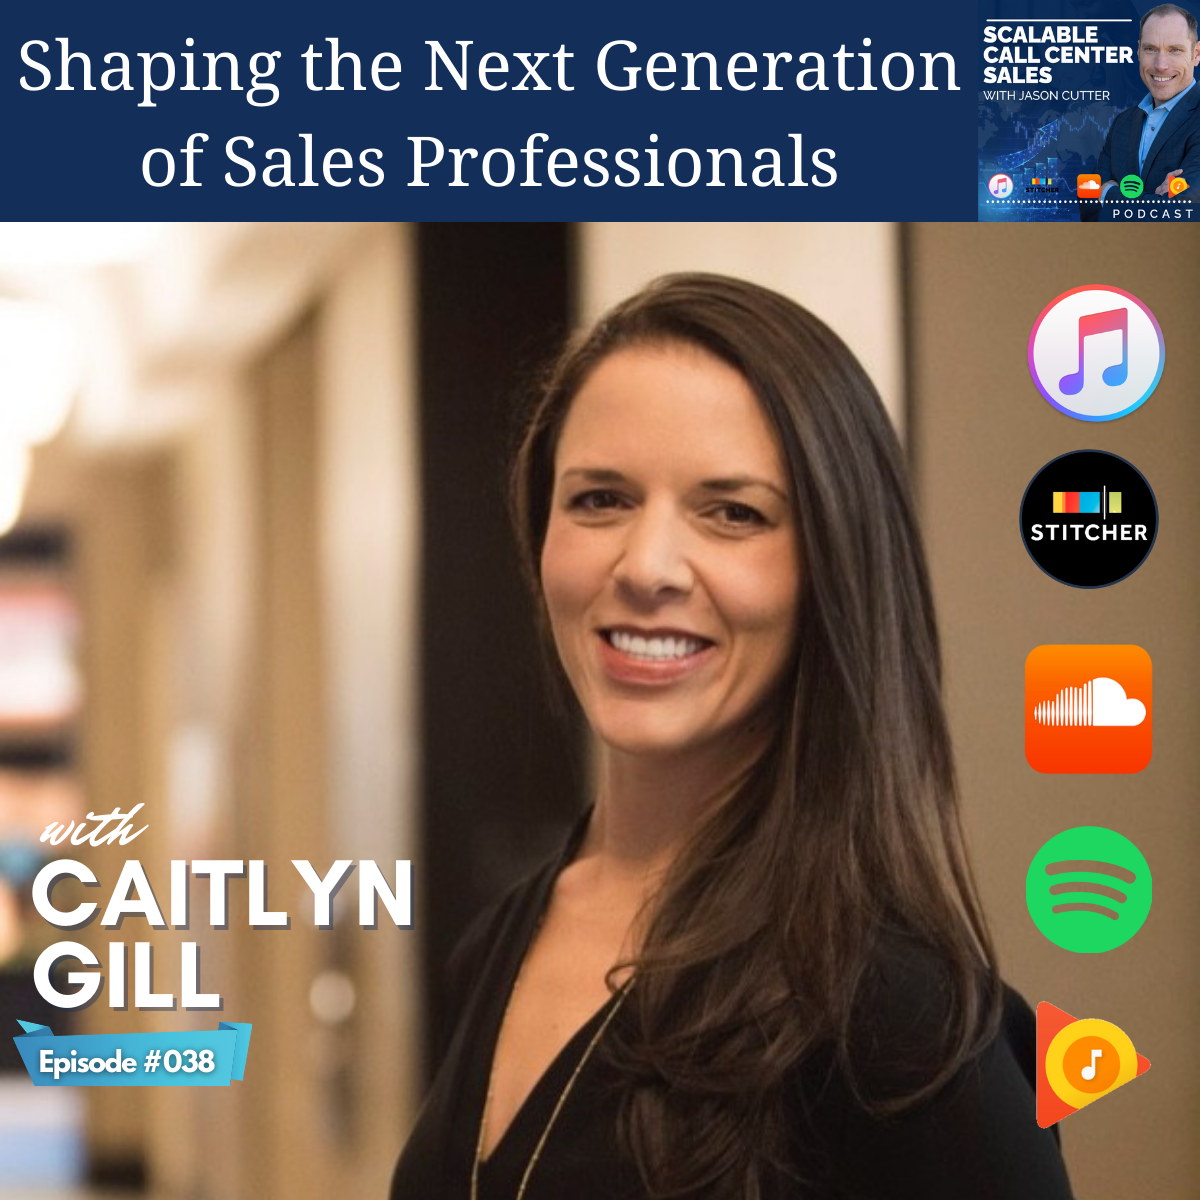 [038] Shaping the Next Generation of Sales Professionals, with Caitlyn Gill from Oregon State Sales Academy